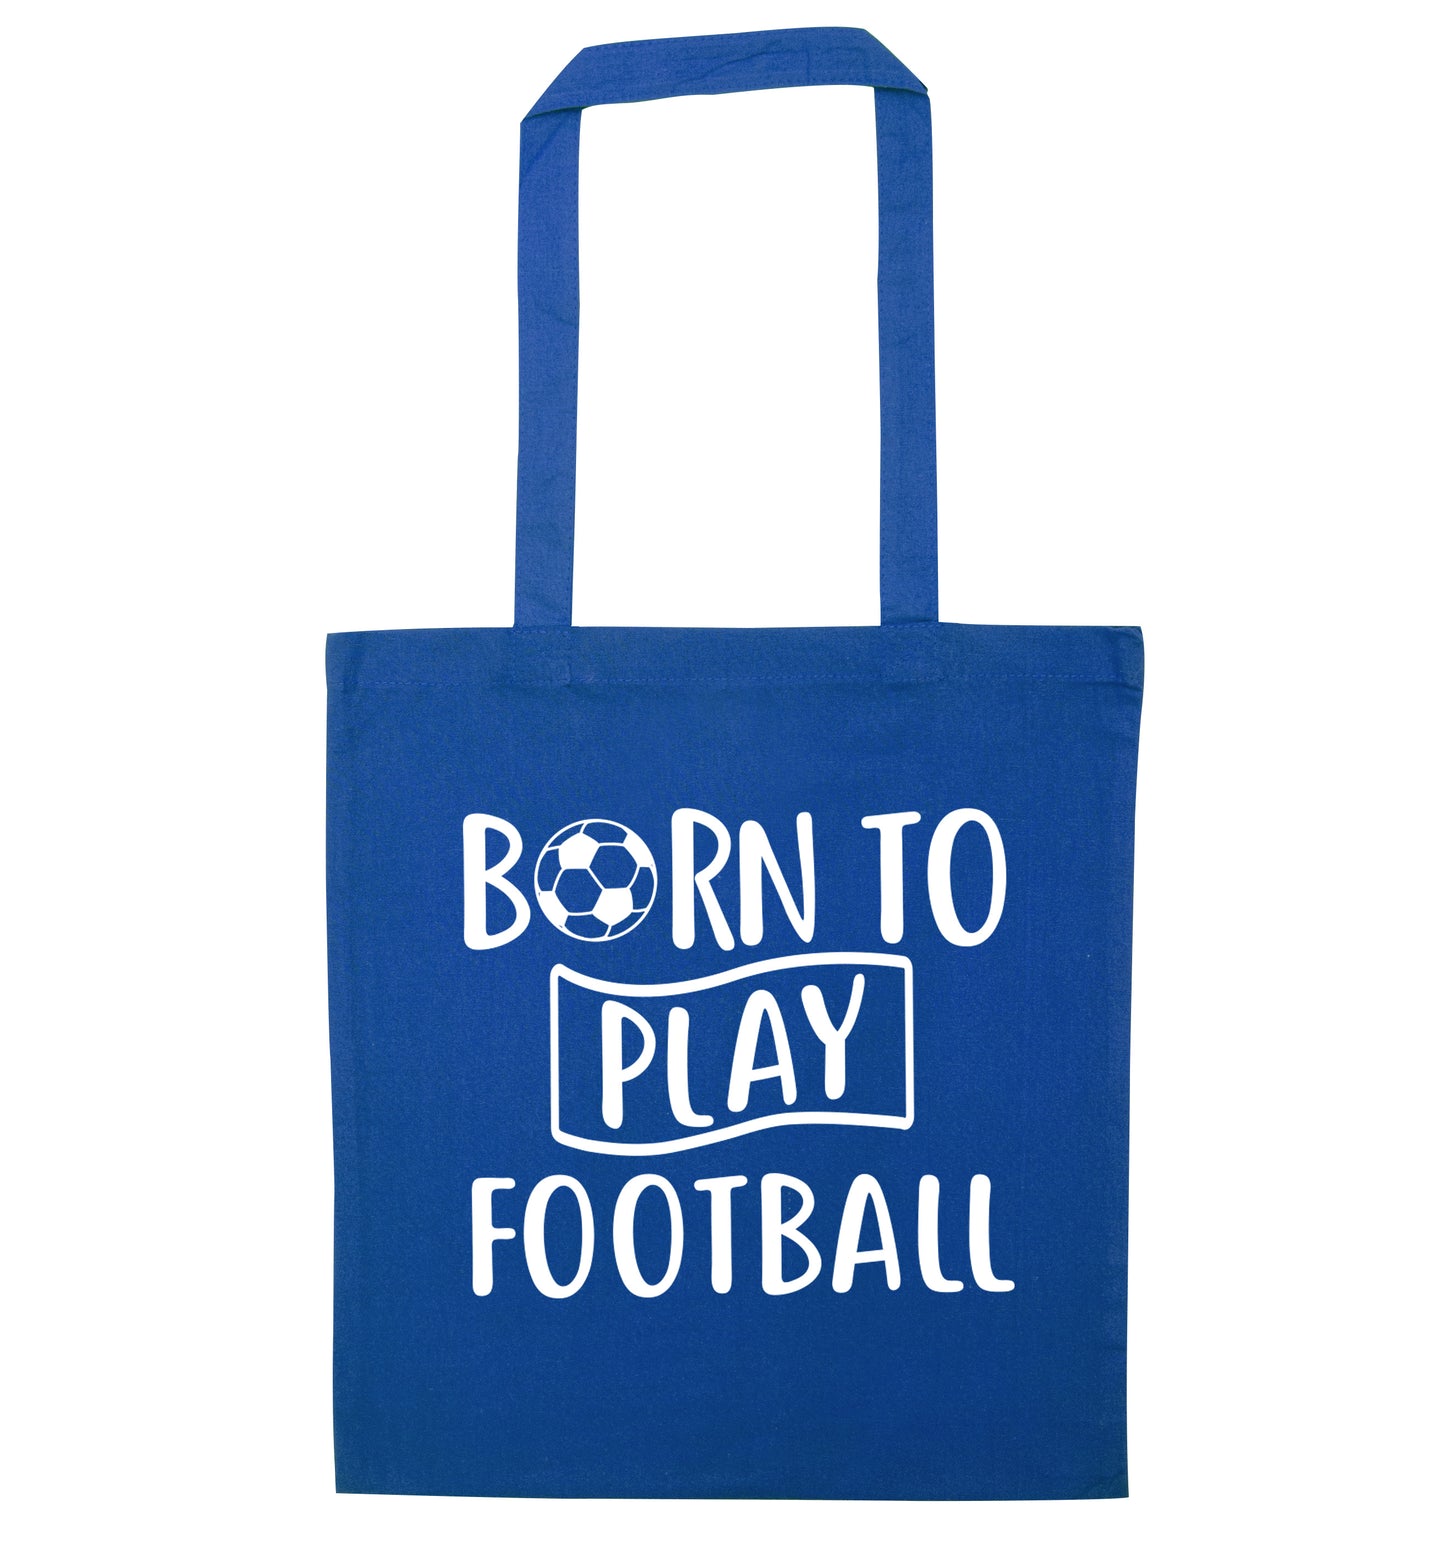 Born to play football blue tote bag